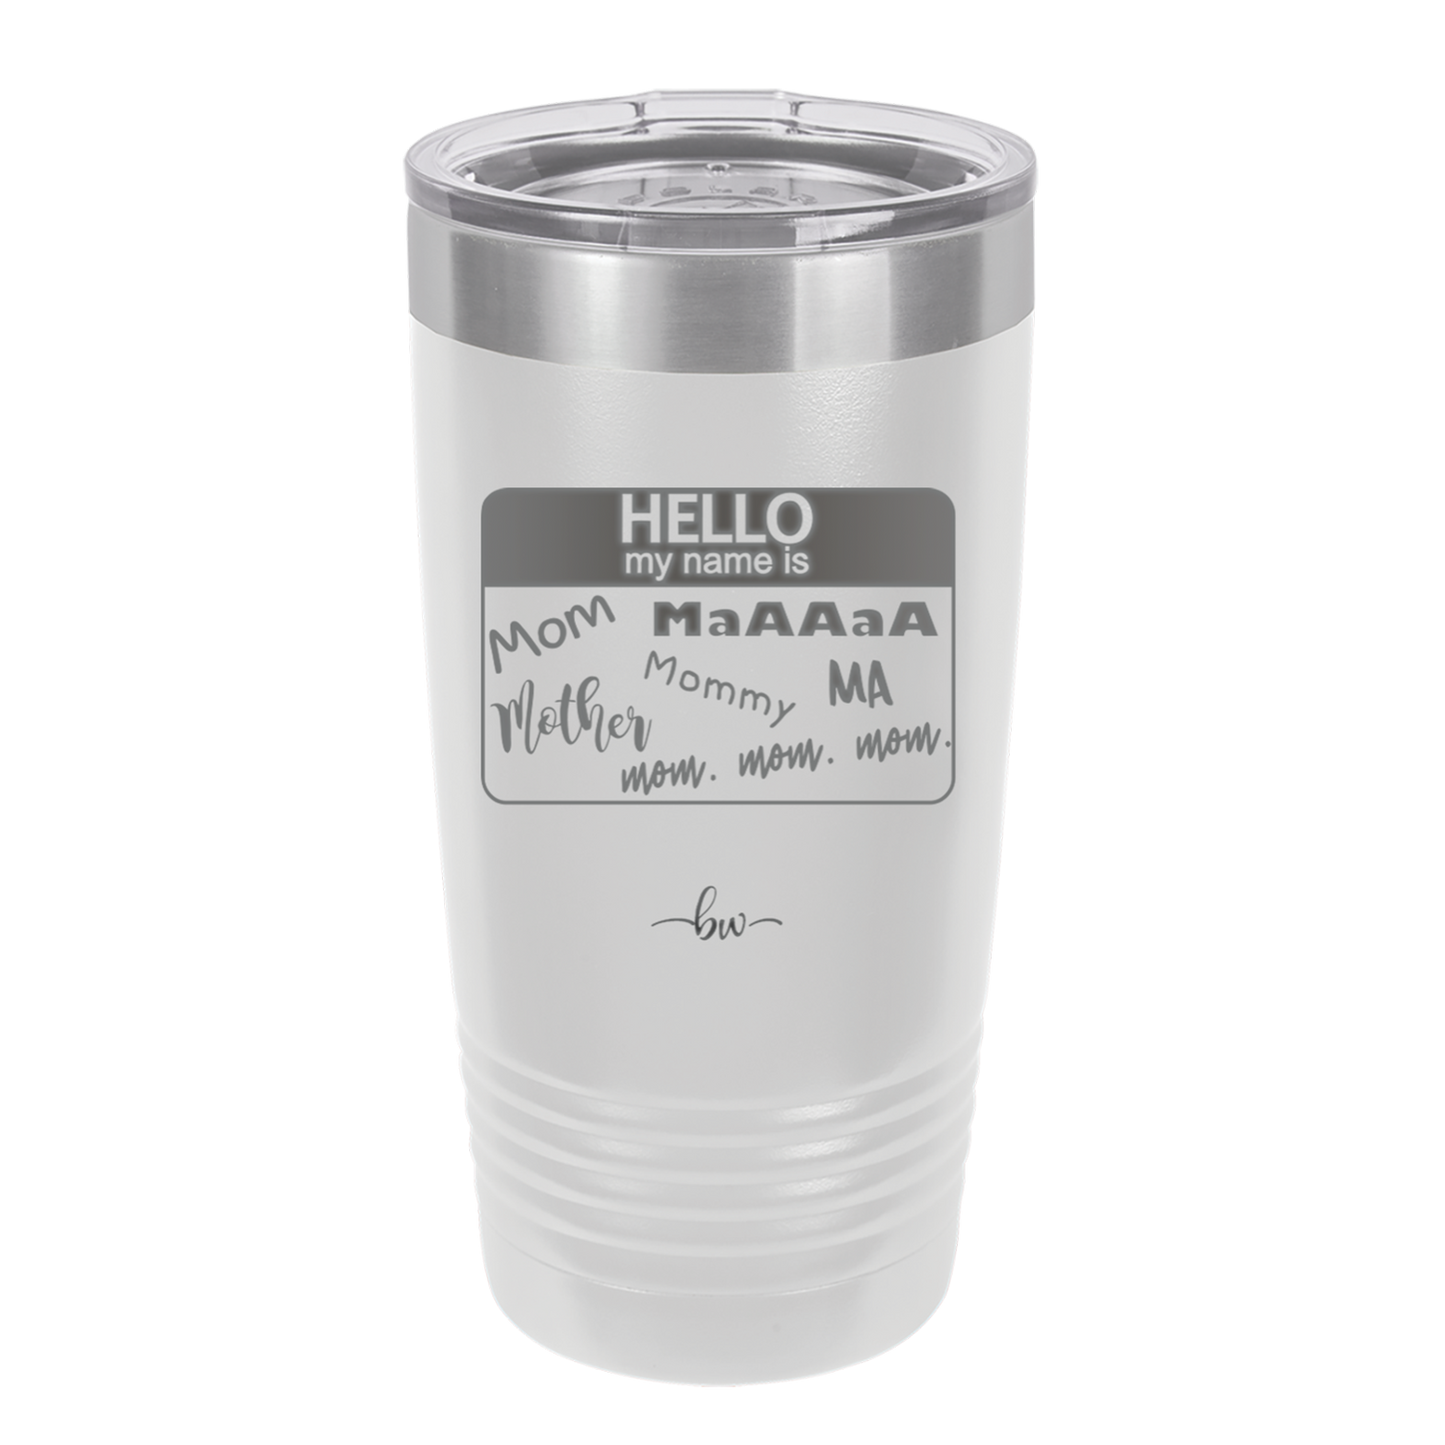 Hello My Name is Mom Maa Mommy Name Tag - Laser Engraved Stainless Steel Drinkware - 1169 -